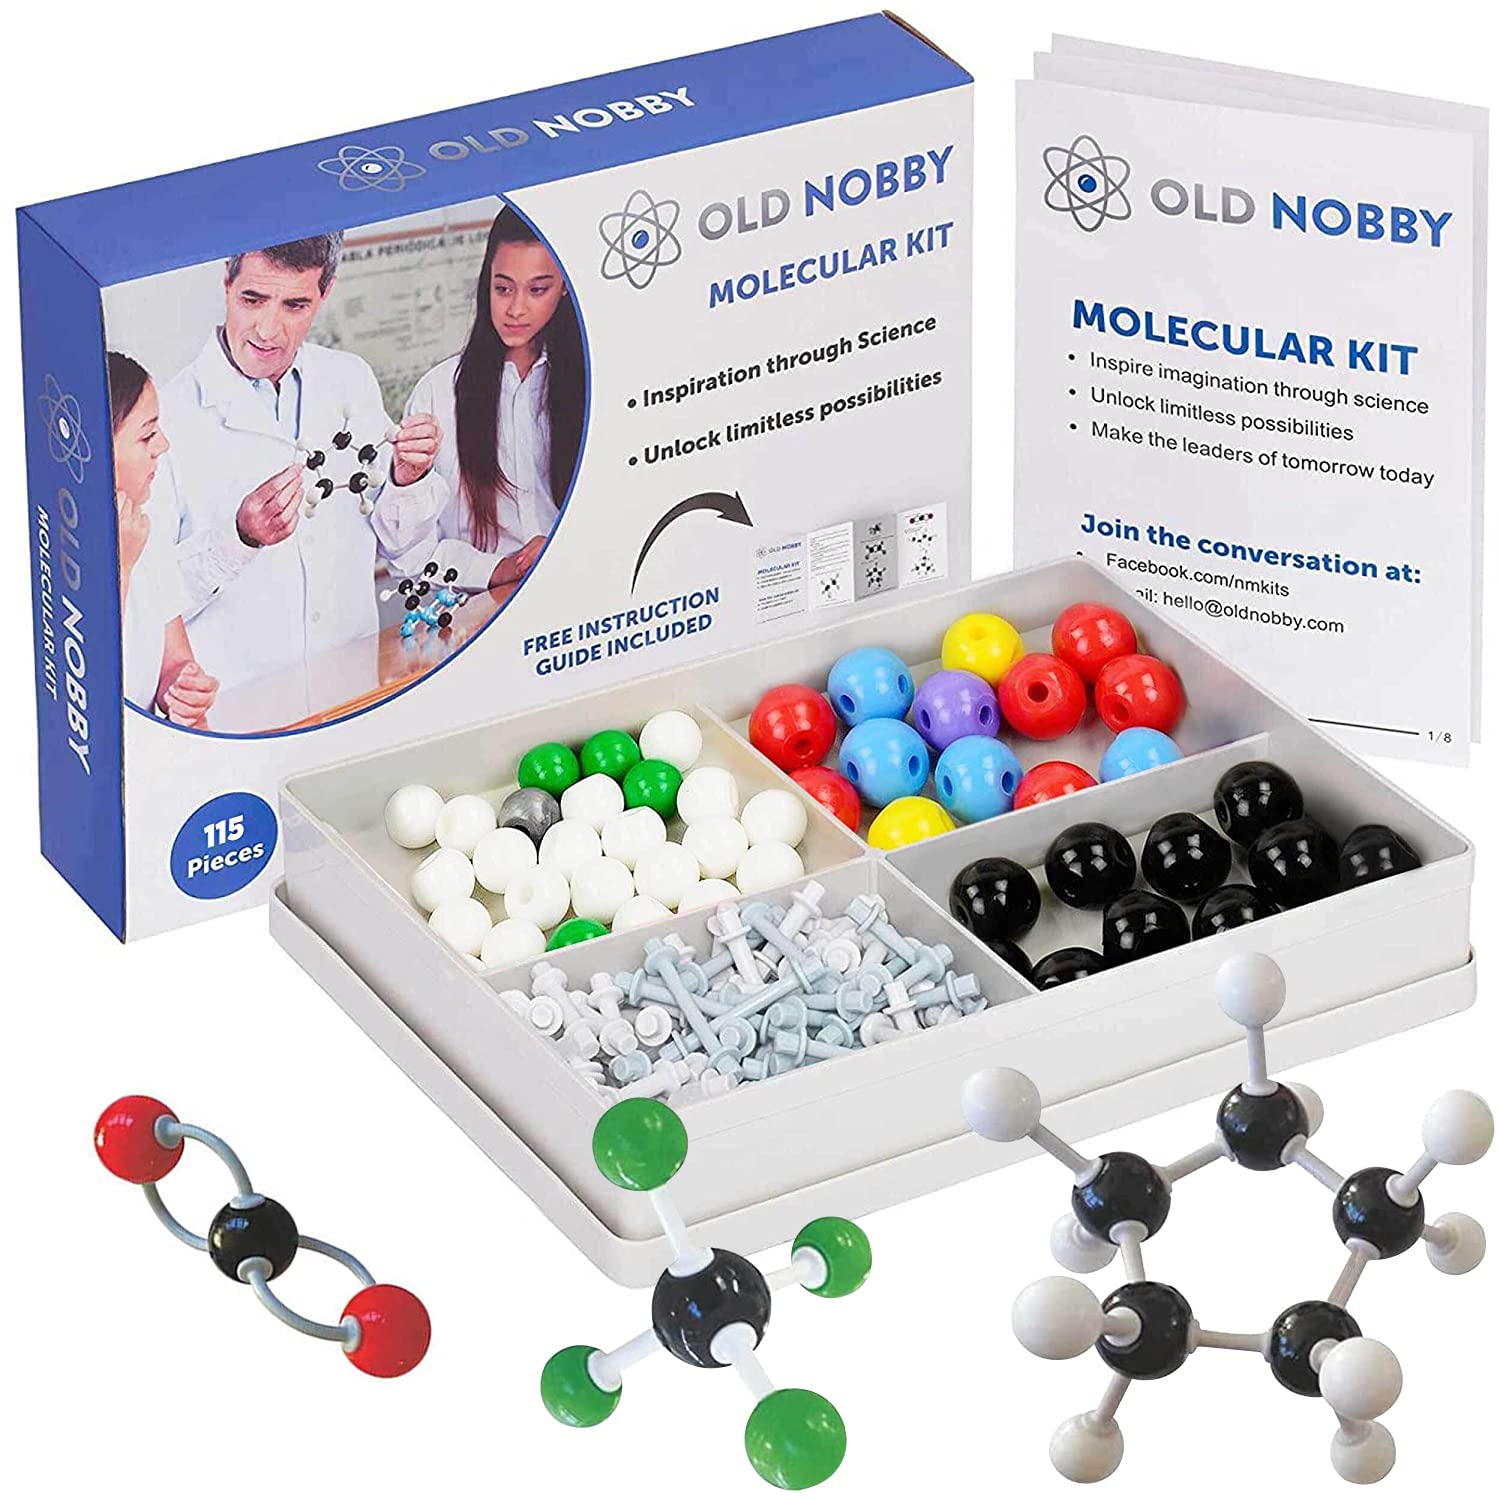 with　Atoms　Young　Guide　Old　Model　Teachers　Pieces)　Students,　Chemistry　Chemistry　for　Bonds　Model　Kit　Nobby　Instructional　and　Kit,　(115　Molecular　Set　Kit　Chemistry　Organic　Scientists